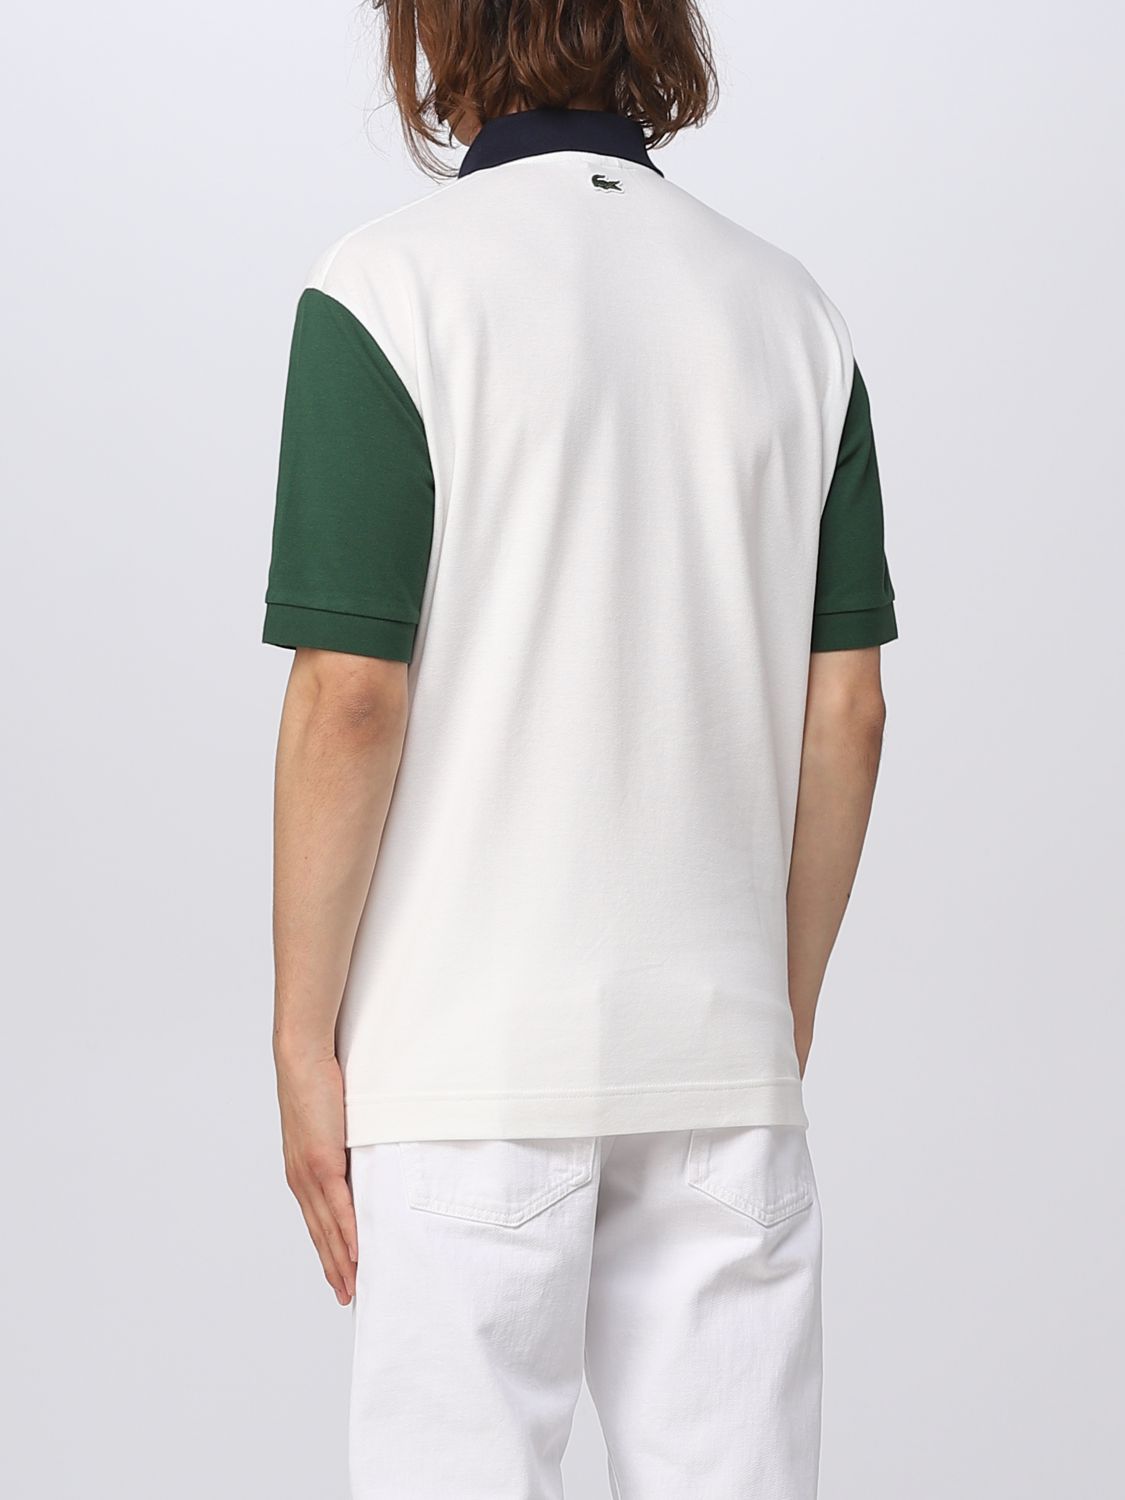 LACOSTE: polo shirt for man - White | Lacoste polo shirt PH7822 online ...